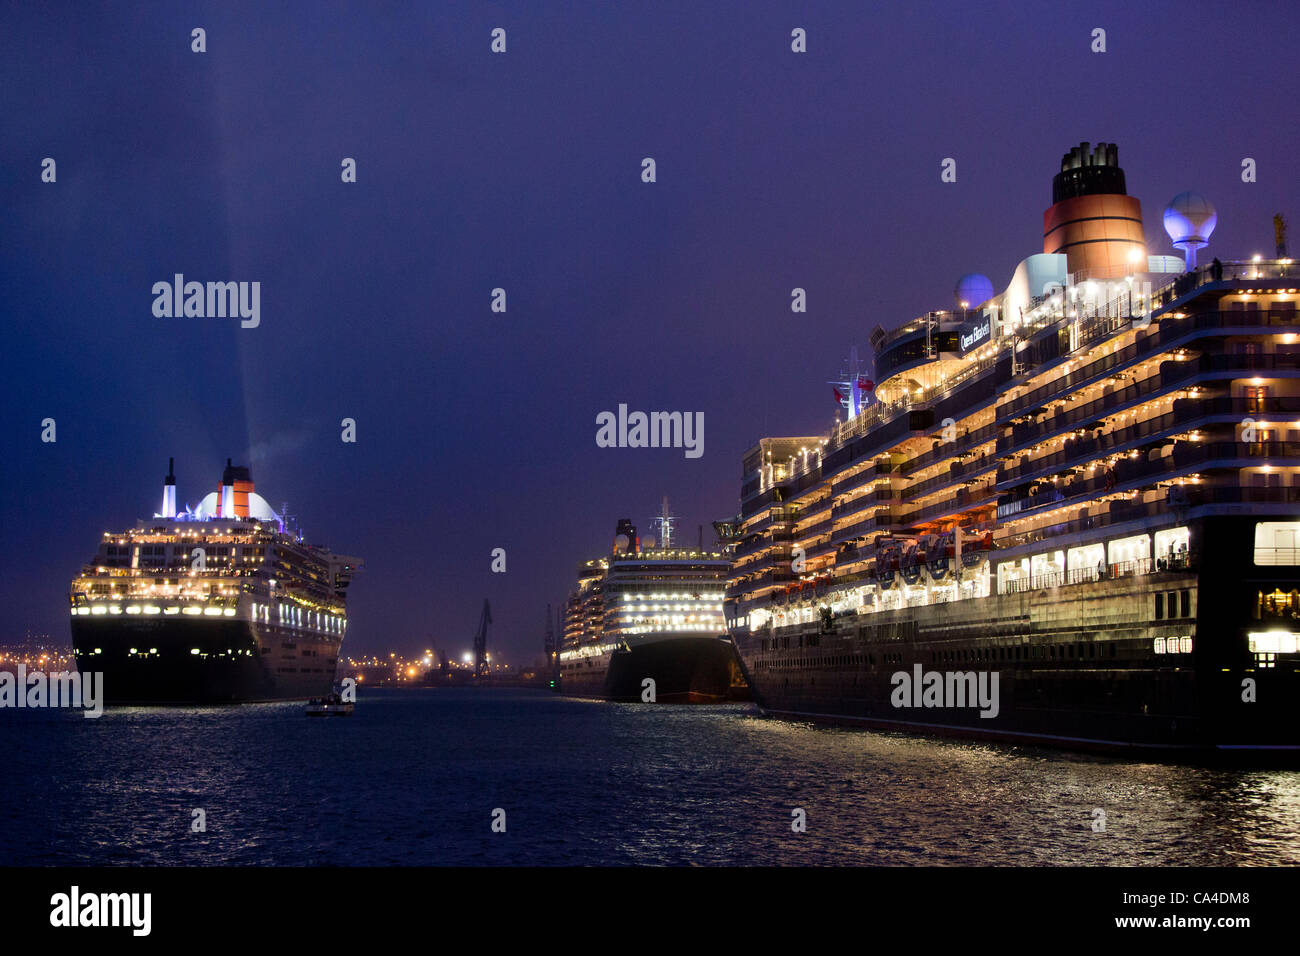 SOUTHAMPTON, UK, 5th June 2012. The Queen Mary 2 (left) Queen Elizabeth (front right) and Queen Victoria (rear right) manouvre in Southampton dock ahead of the Firework Spectacular as part of the 'Three Queens' event during celebrations for Queen Elizabeth II's Diamond Jubilee. Stock Photo